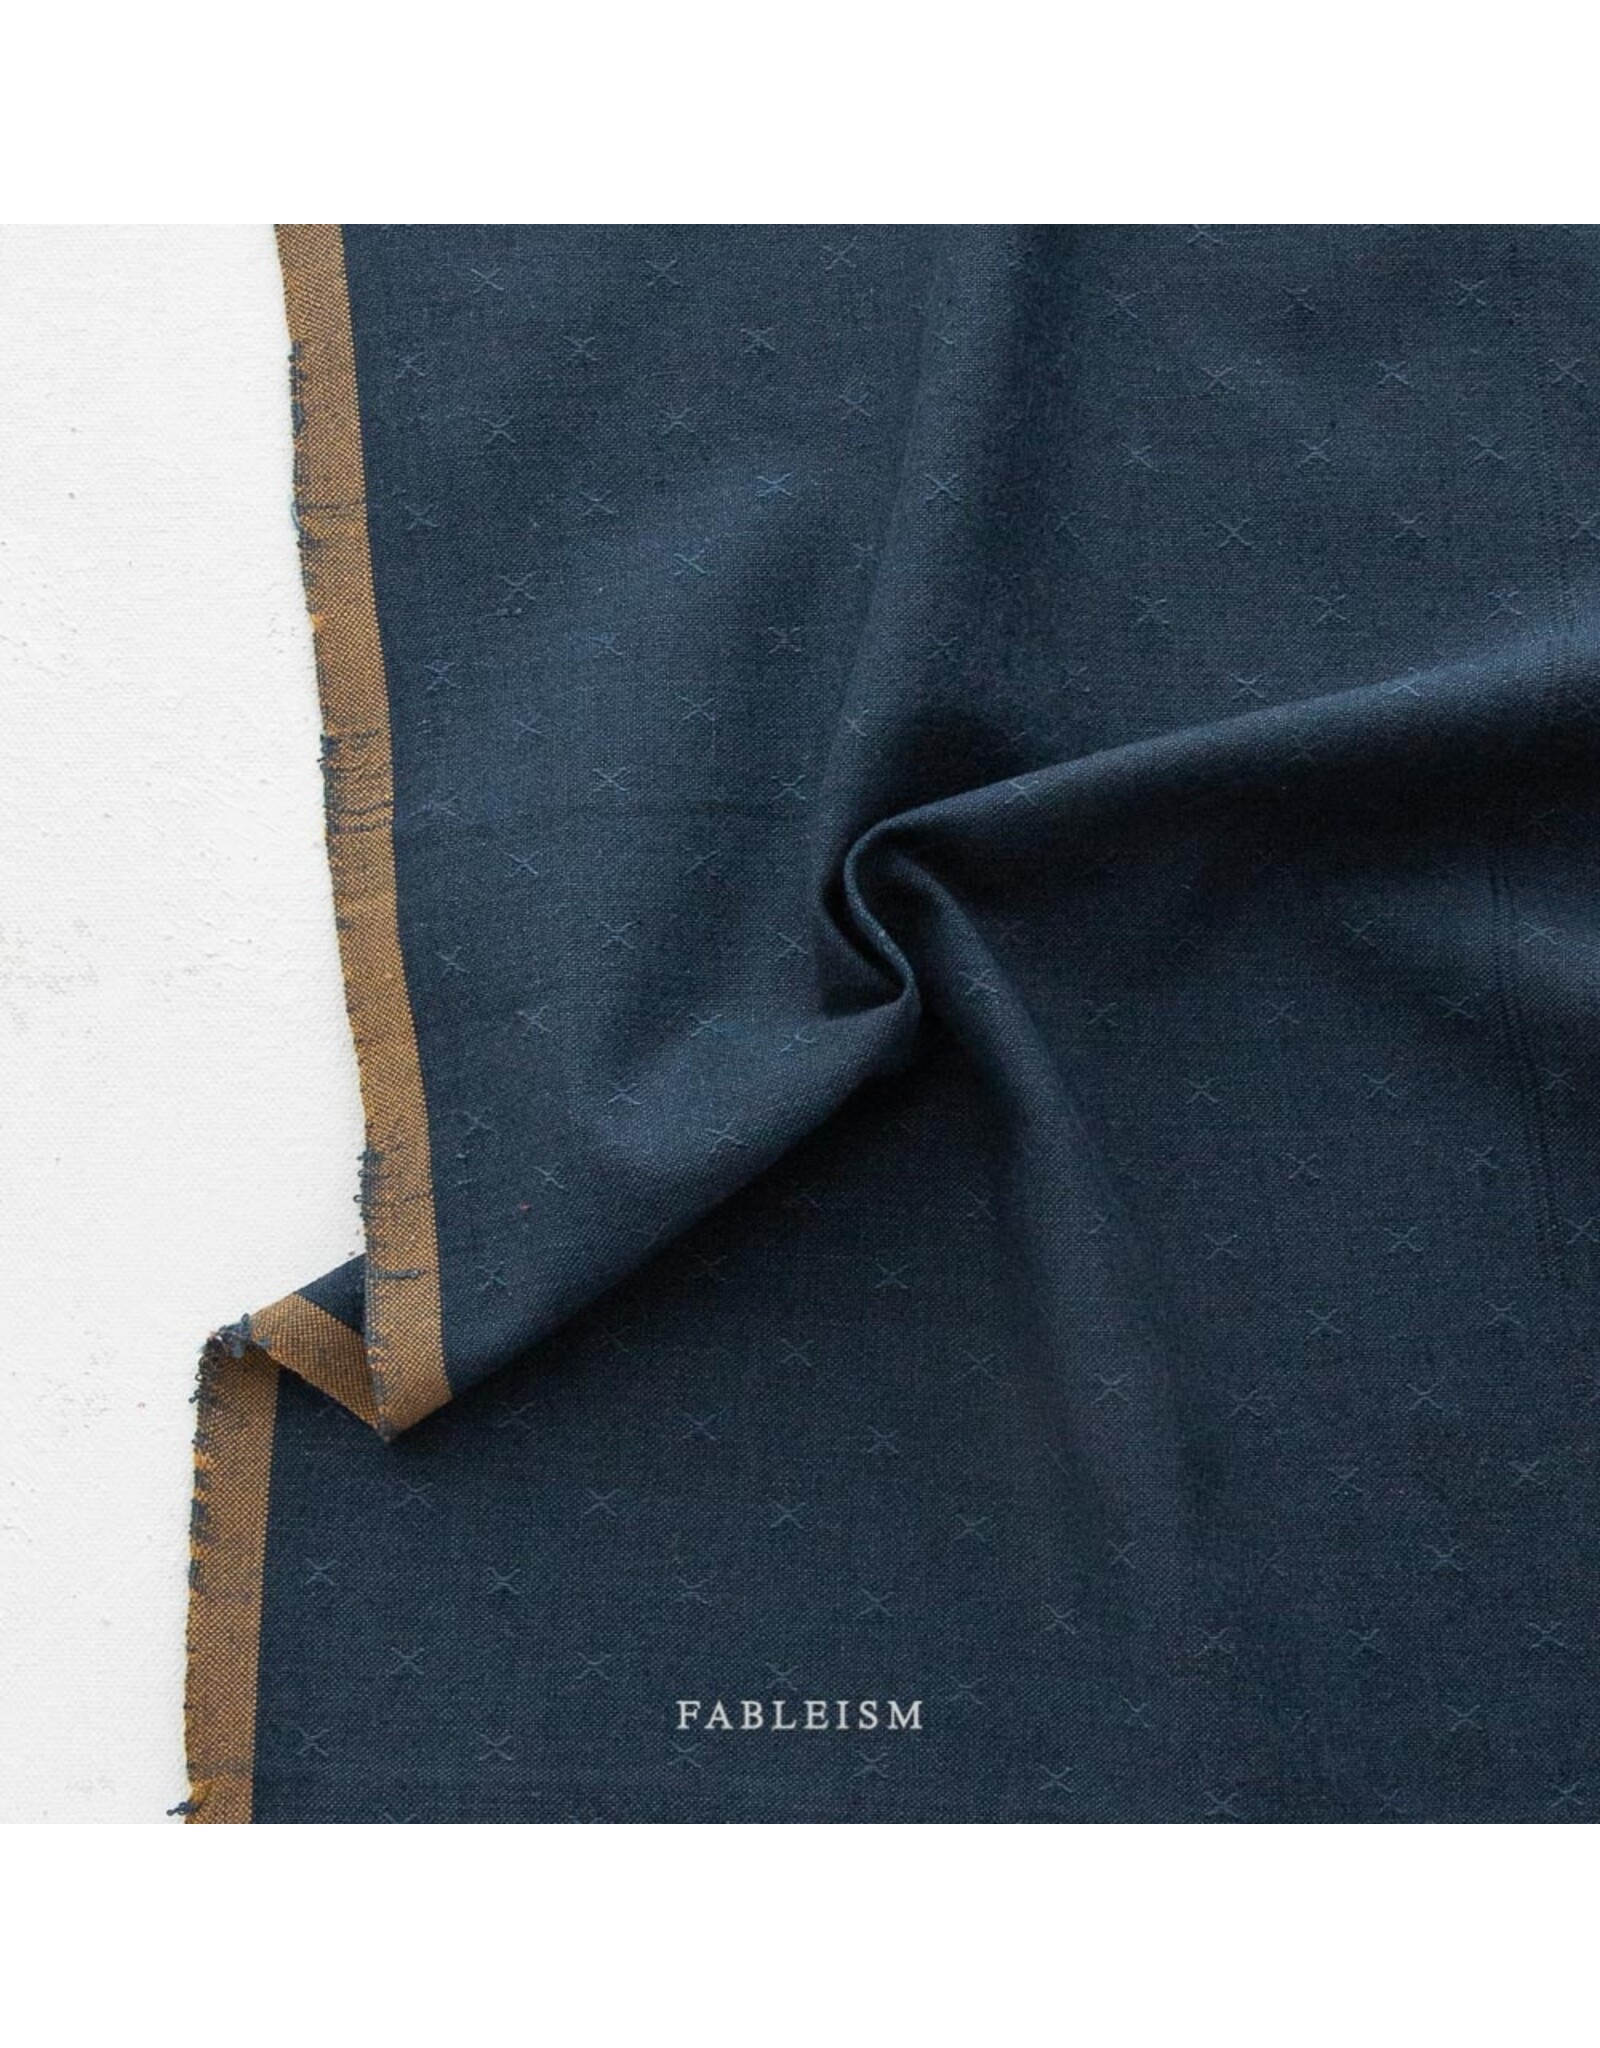 Fableism Sprout Wovens, Midnight, Fabric Half-Yards